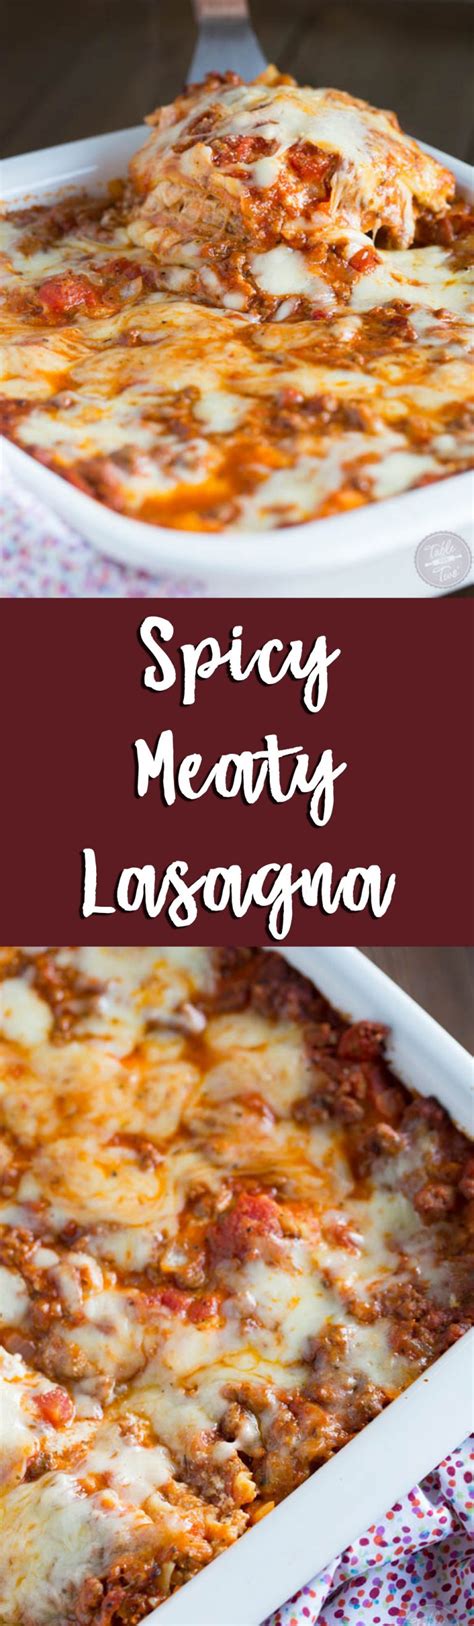 Spicy Meaty Lasagna Table For Two® By Julie Chiou